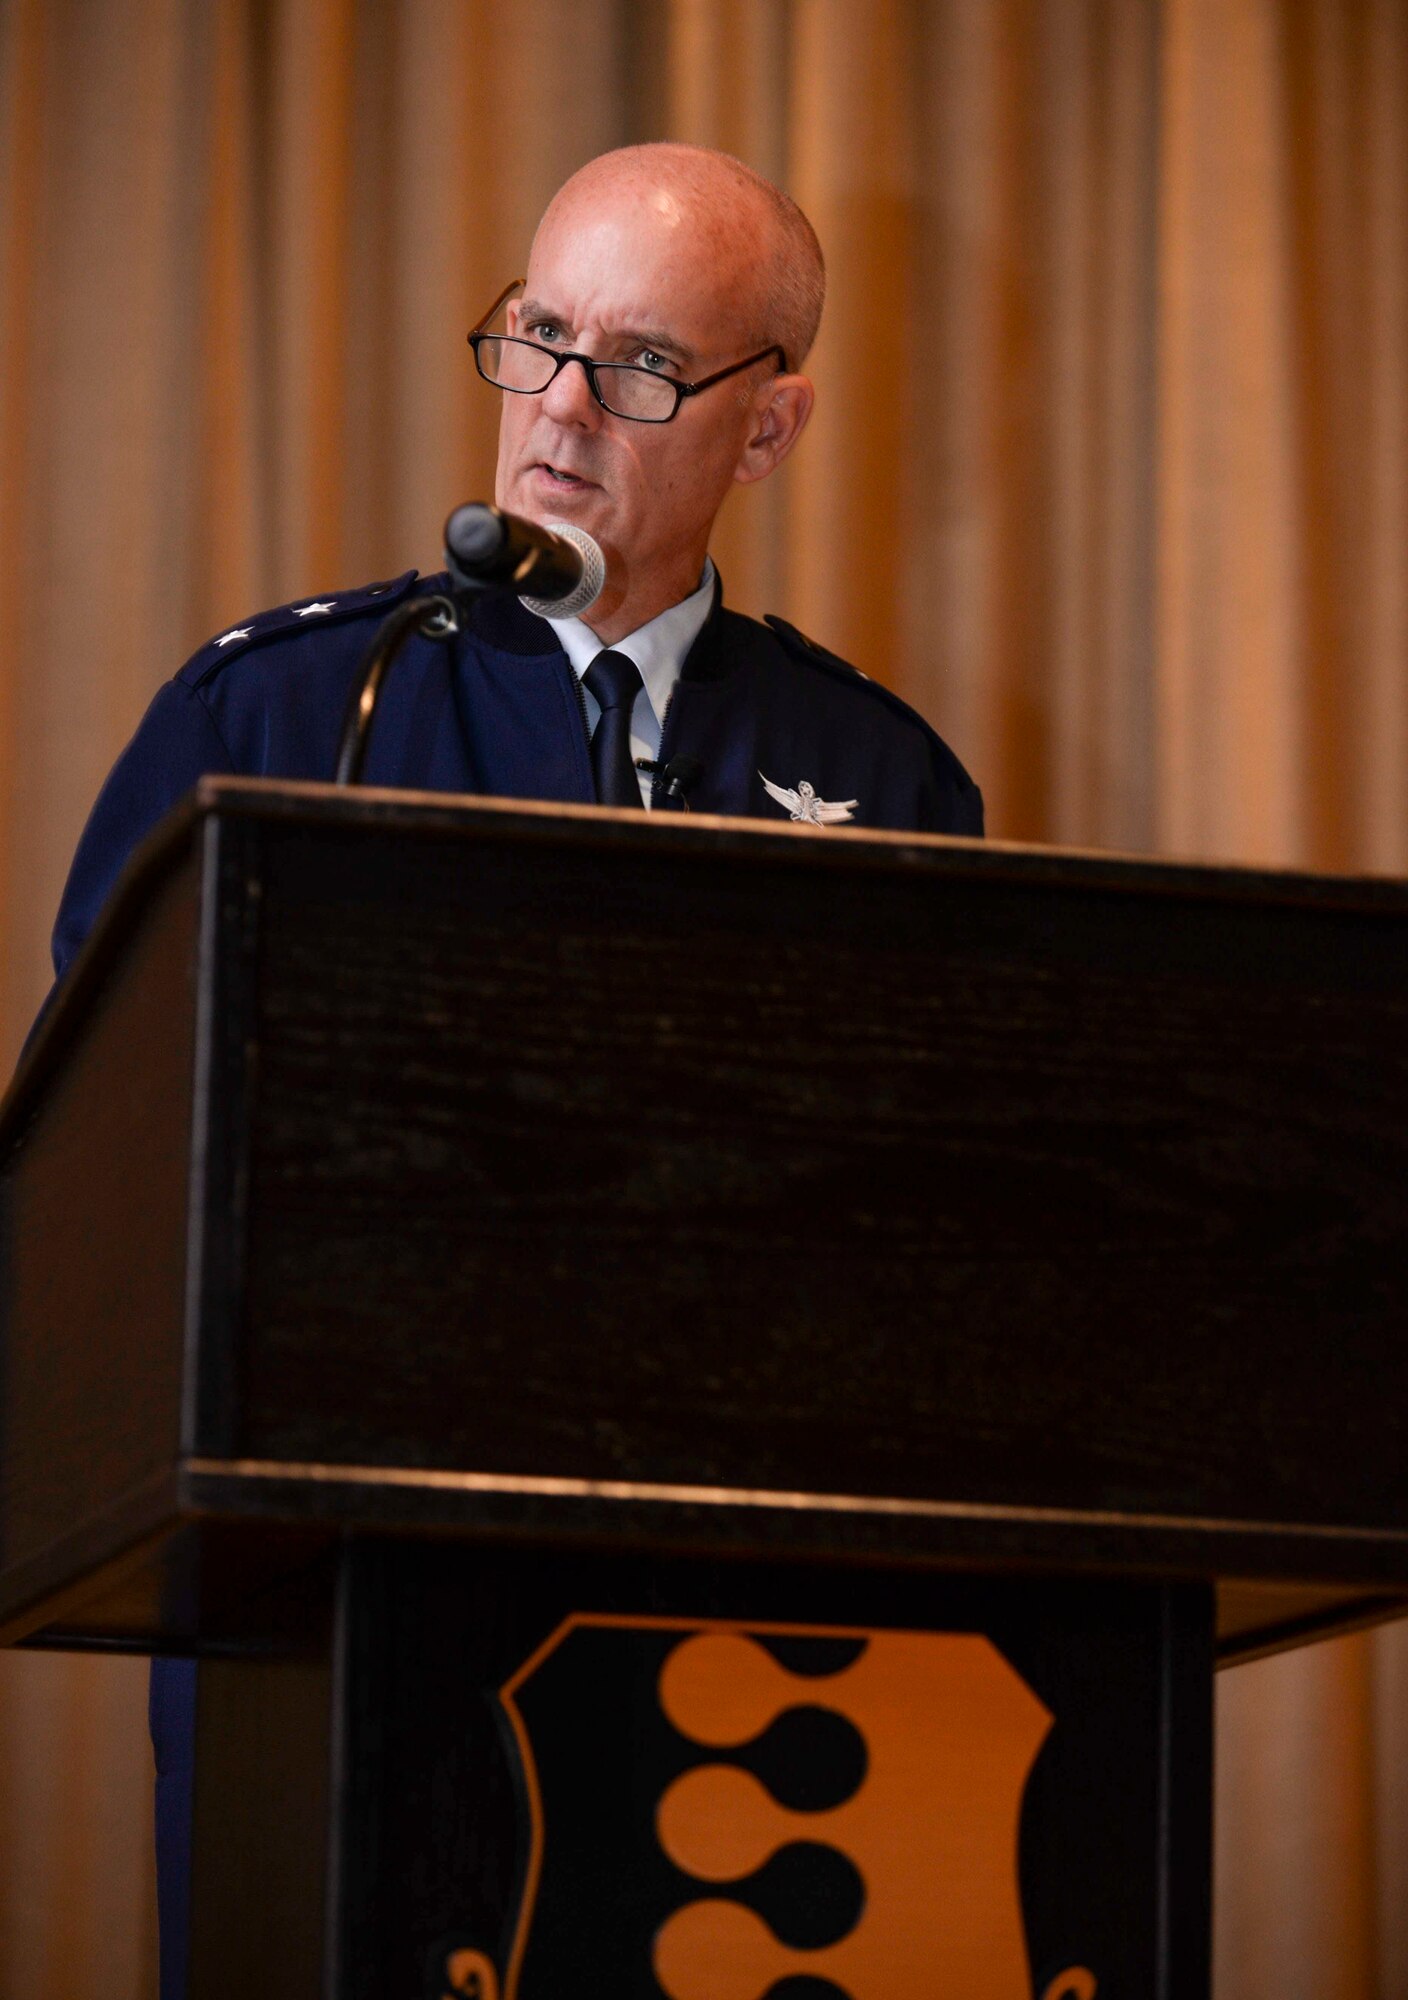 Maj. Gen. Michael Fortney, the vice commander of Air Force Global Strike Command, speaks about nuclear deterrence during a Striker Speaking Series symposium at Ellsworth Air Force Base, S.D., July 21, 2016. Fortney was one of four panel members at the event and spoke on four assertions, or myths, that many in the general public believe about nuclear arsenals and how Airmen can overcome misperception with knowledge. (U.S. Air Force photo by Airman 1st Class Sadie Colbert)